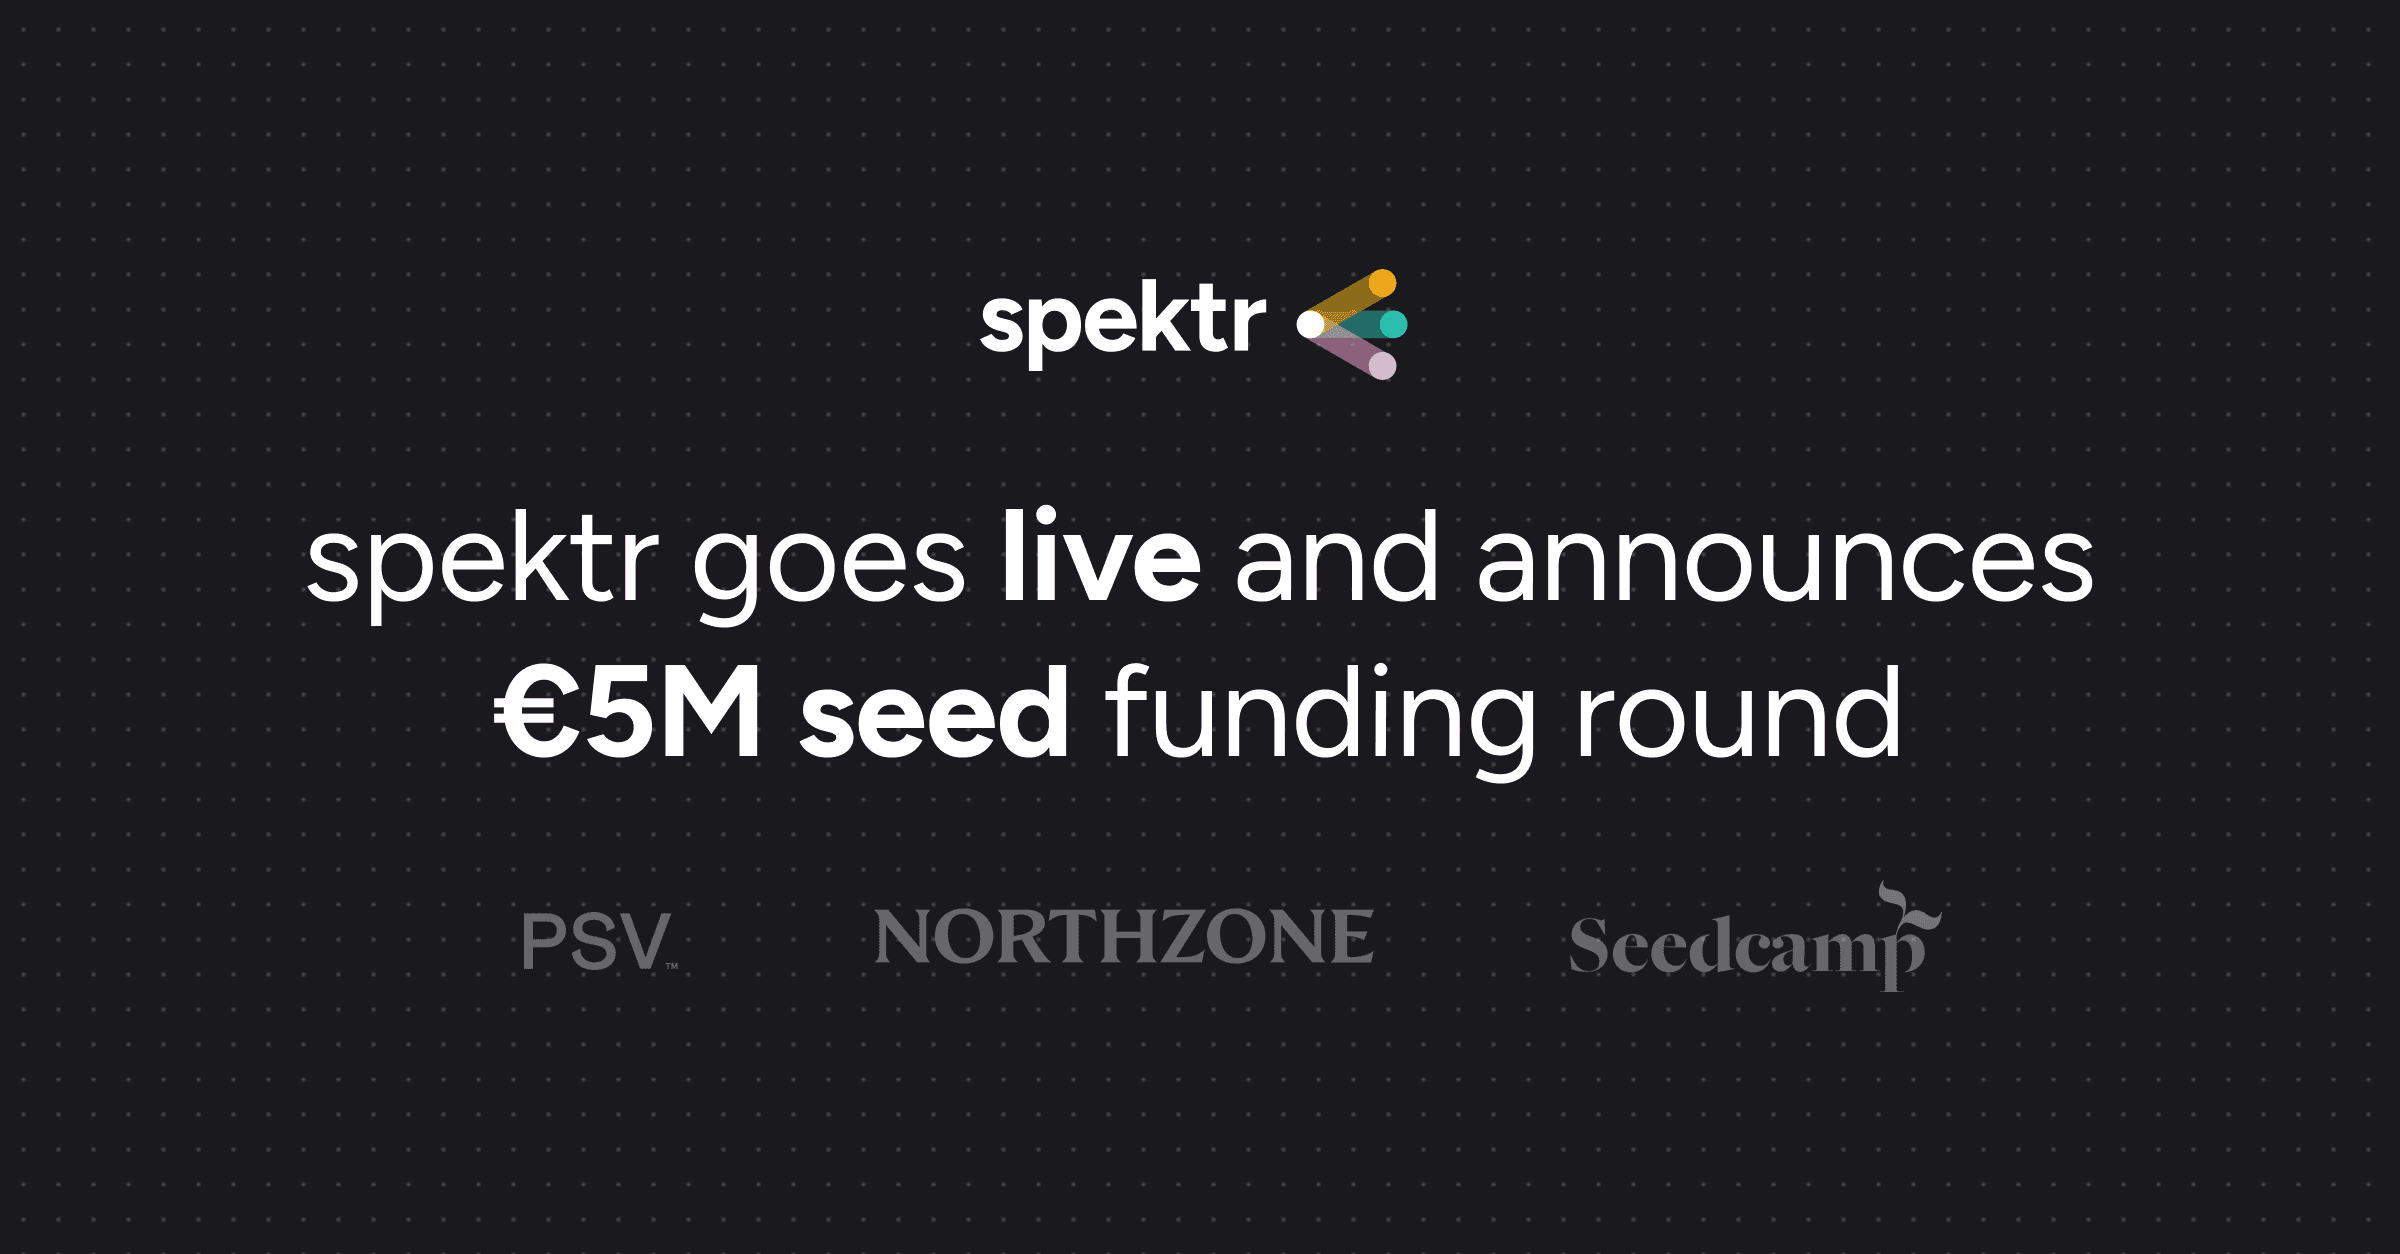 spektr has launched